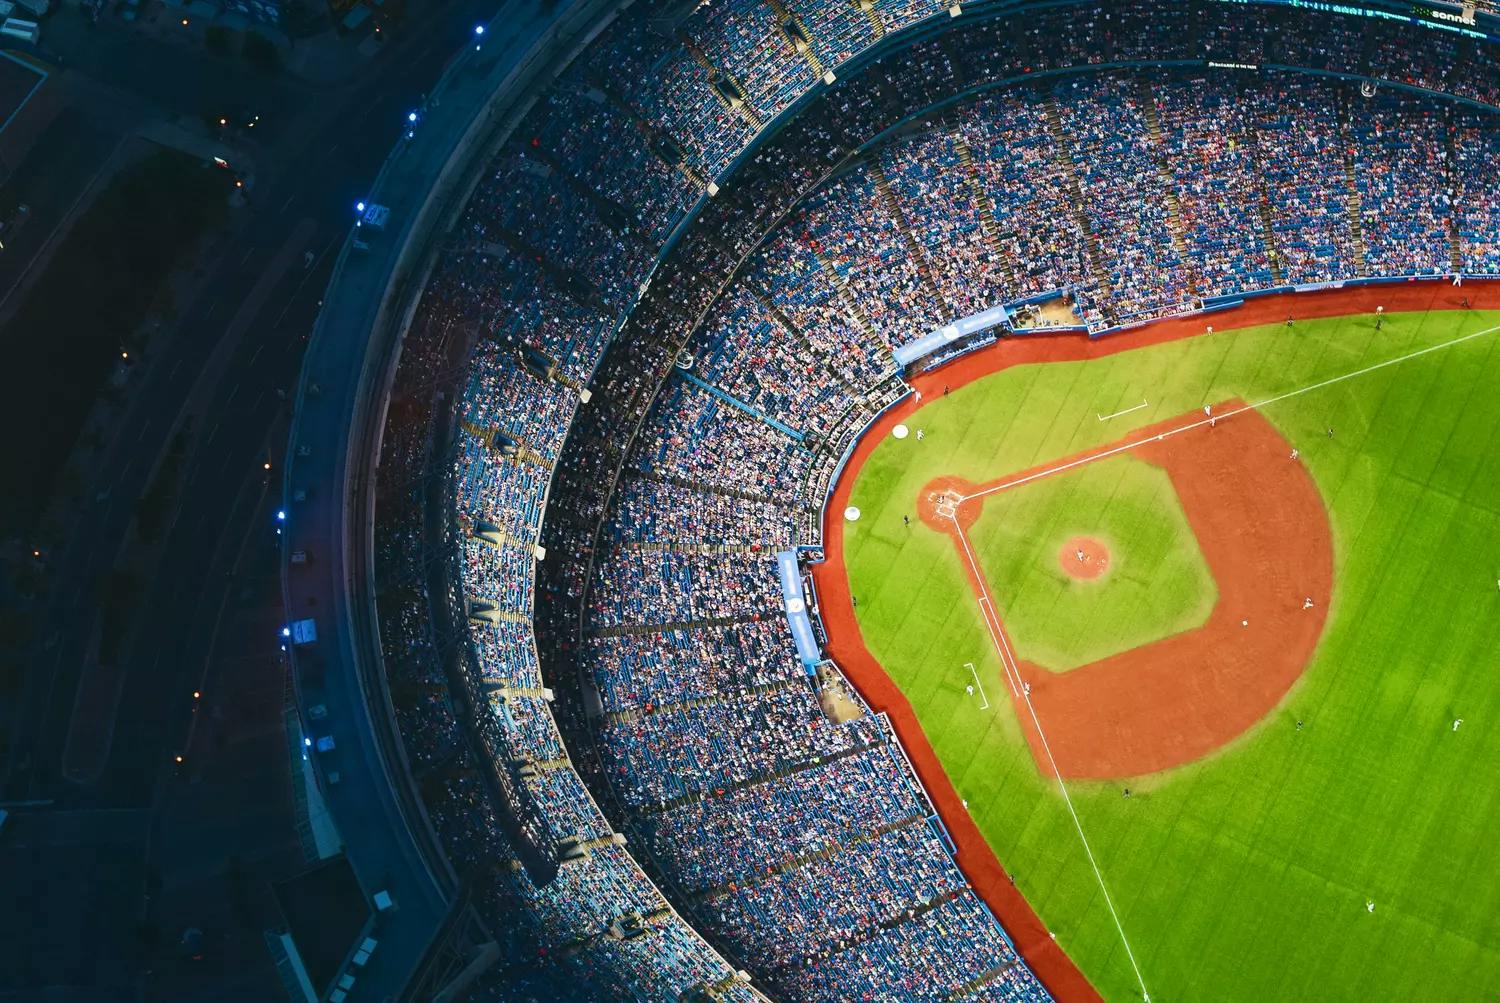 Rogers Centre image